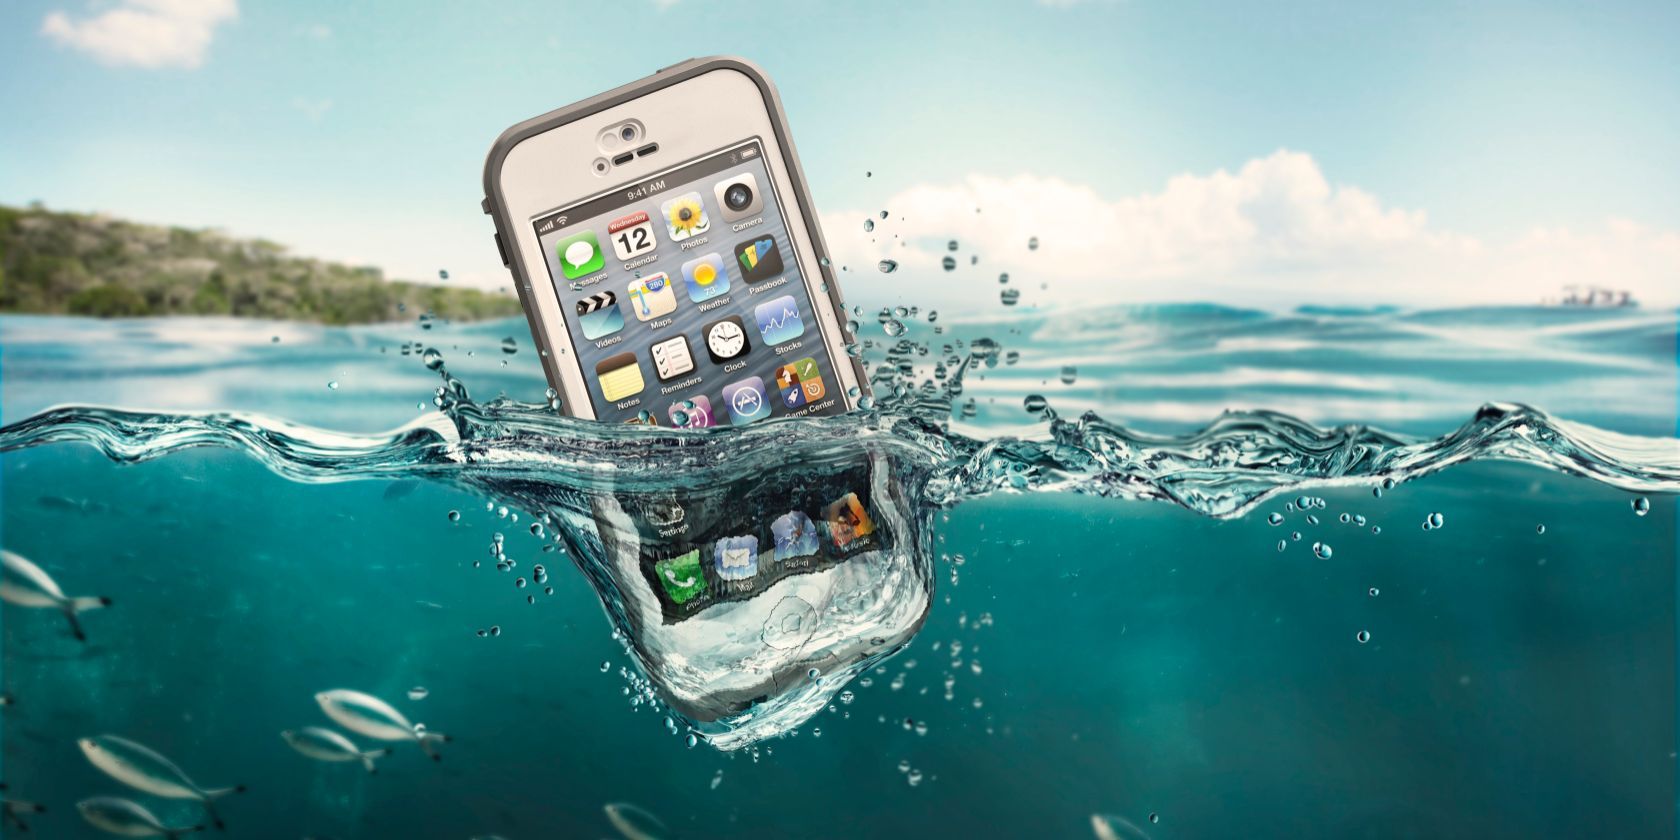 Waterproof Your iPhone With These Top 5 Cases